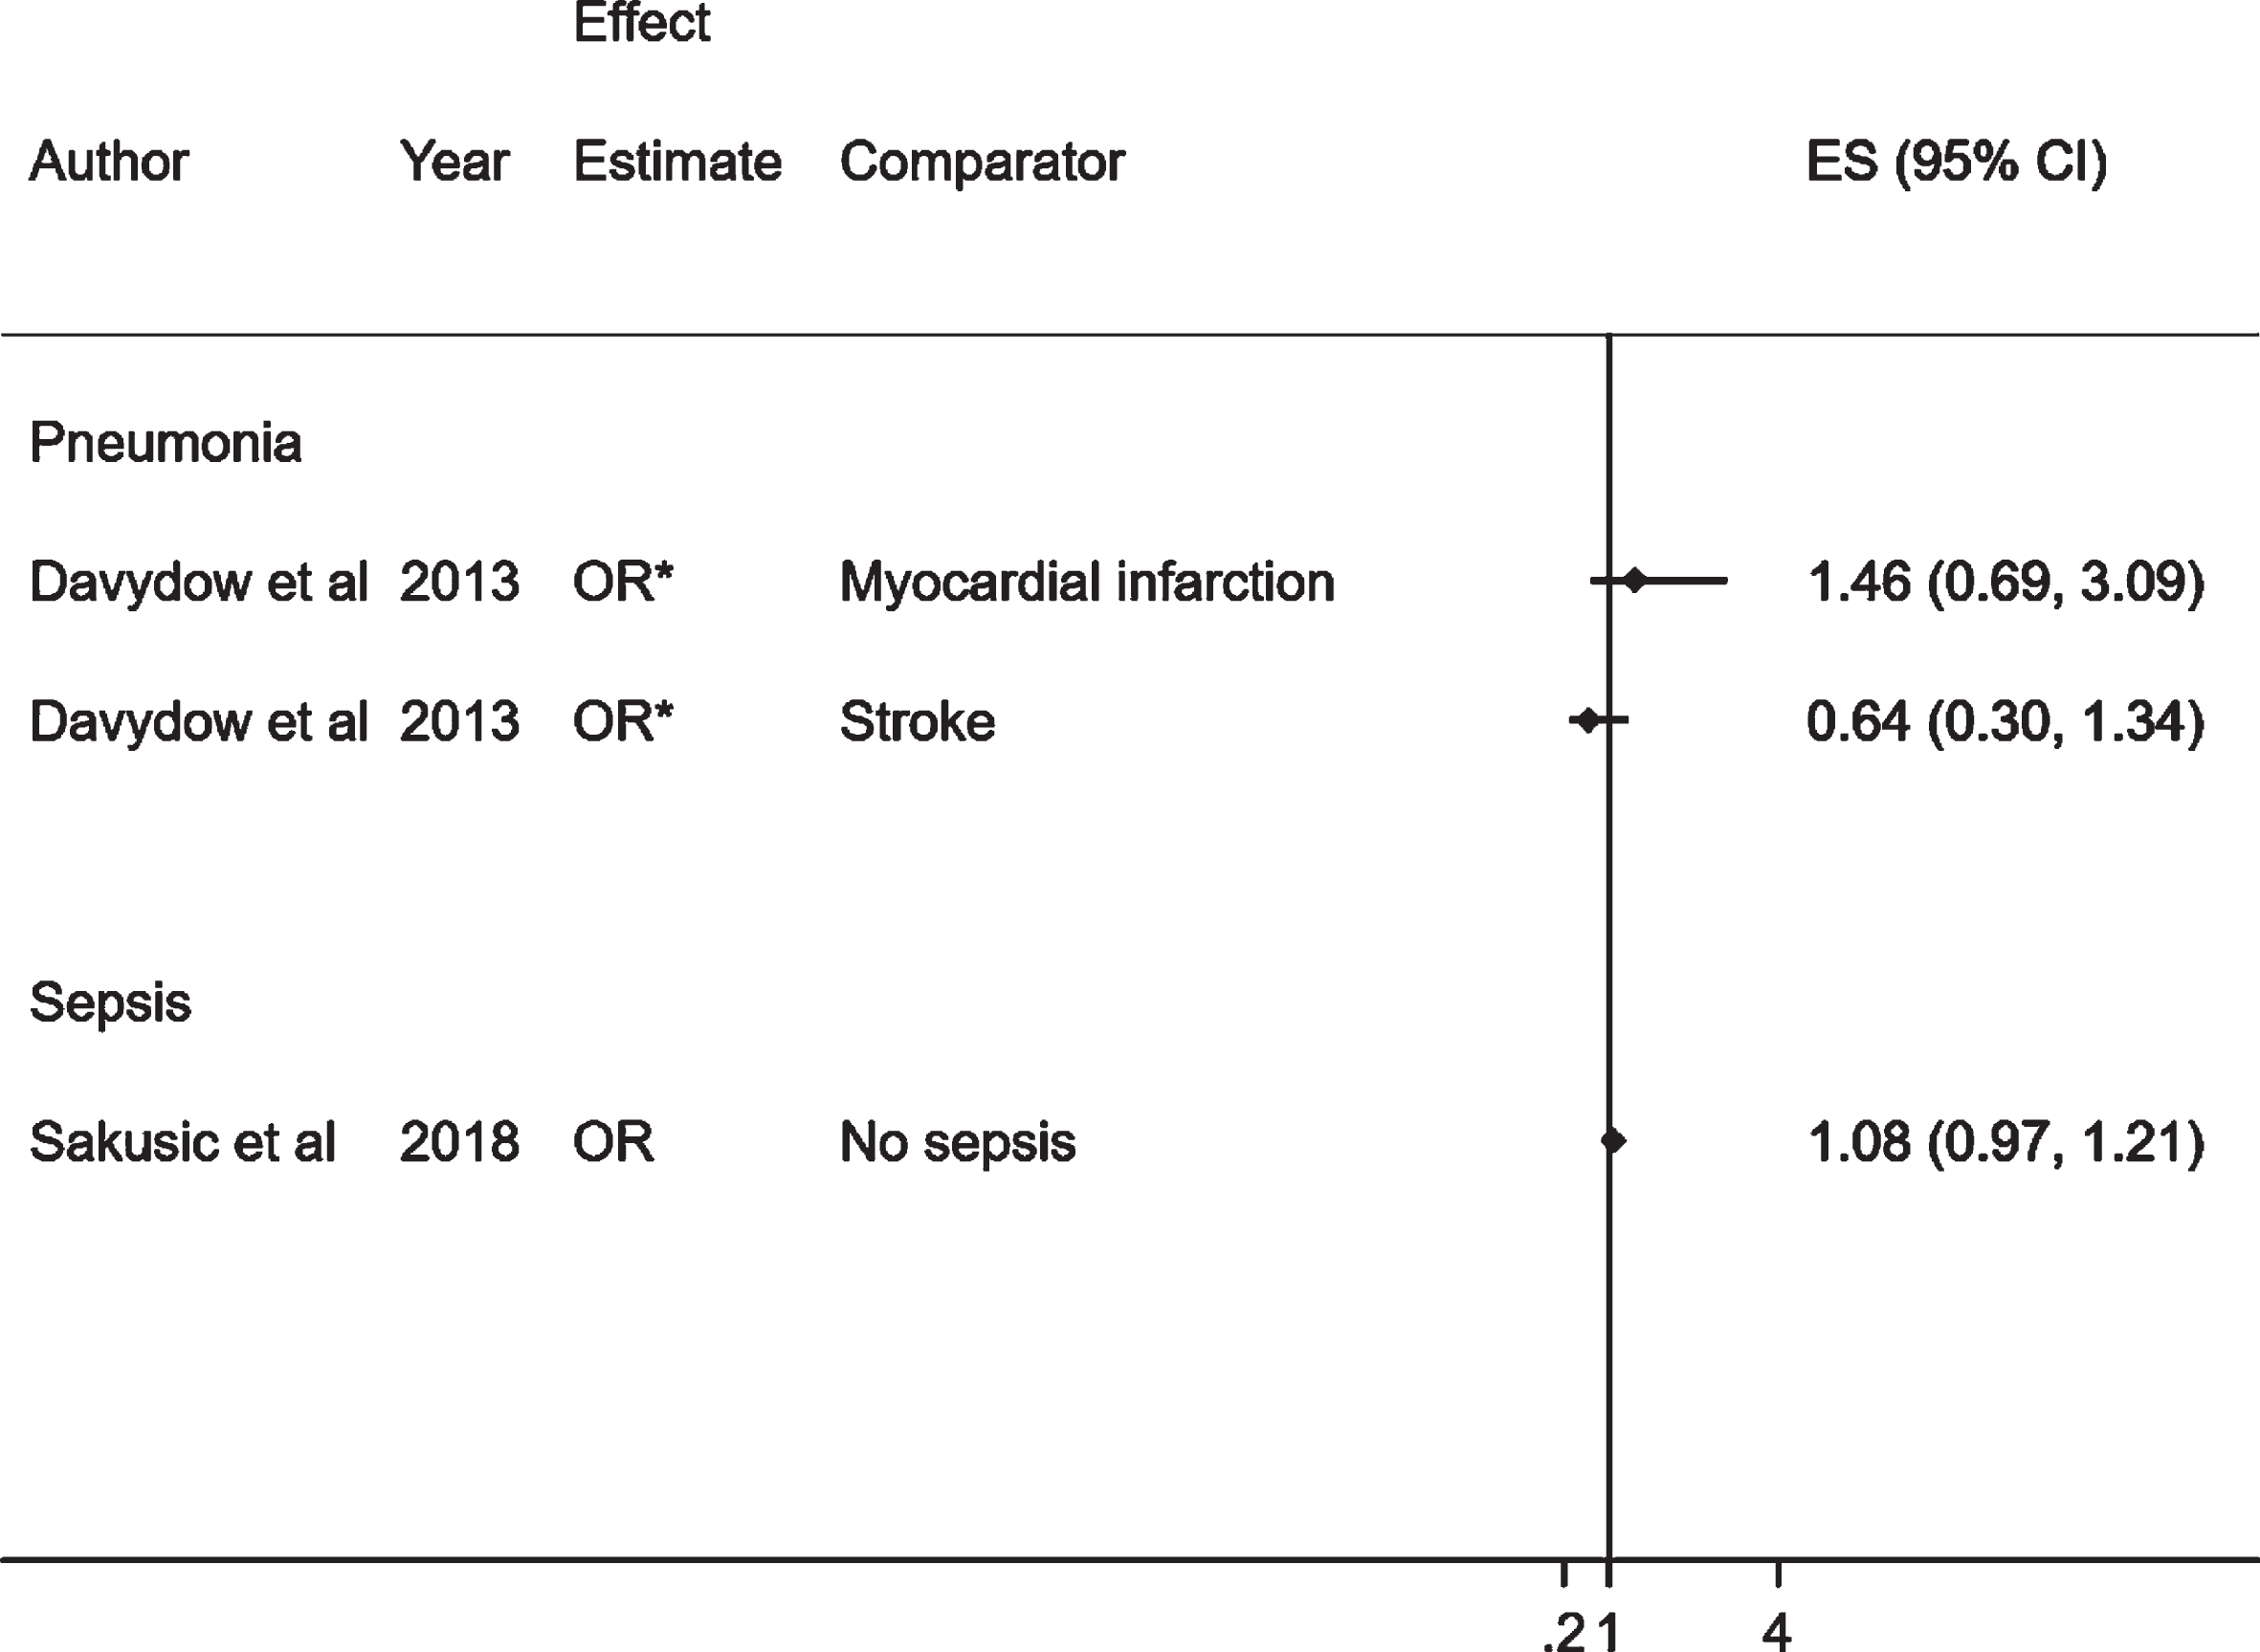 Forest plot showing the effect of common bacterial infections on cognitive decline. *Unadjusted effect estimates for the study by Davydow et al., 2013 [26]. The median age in years (SD) in this study for each exposure was as follows: pneumonia 77.1 (9.4), myocardial infarction, 75.5 (8.2) and stroke 77.0 (8.4).